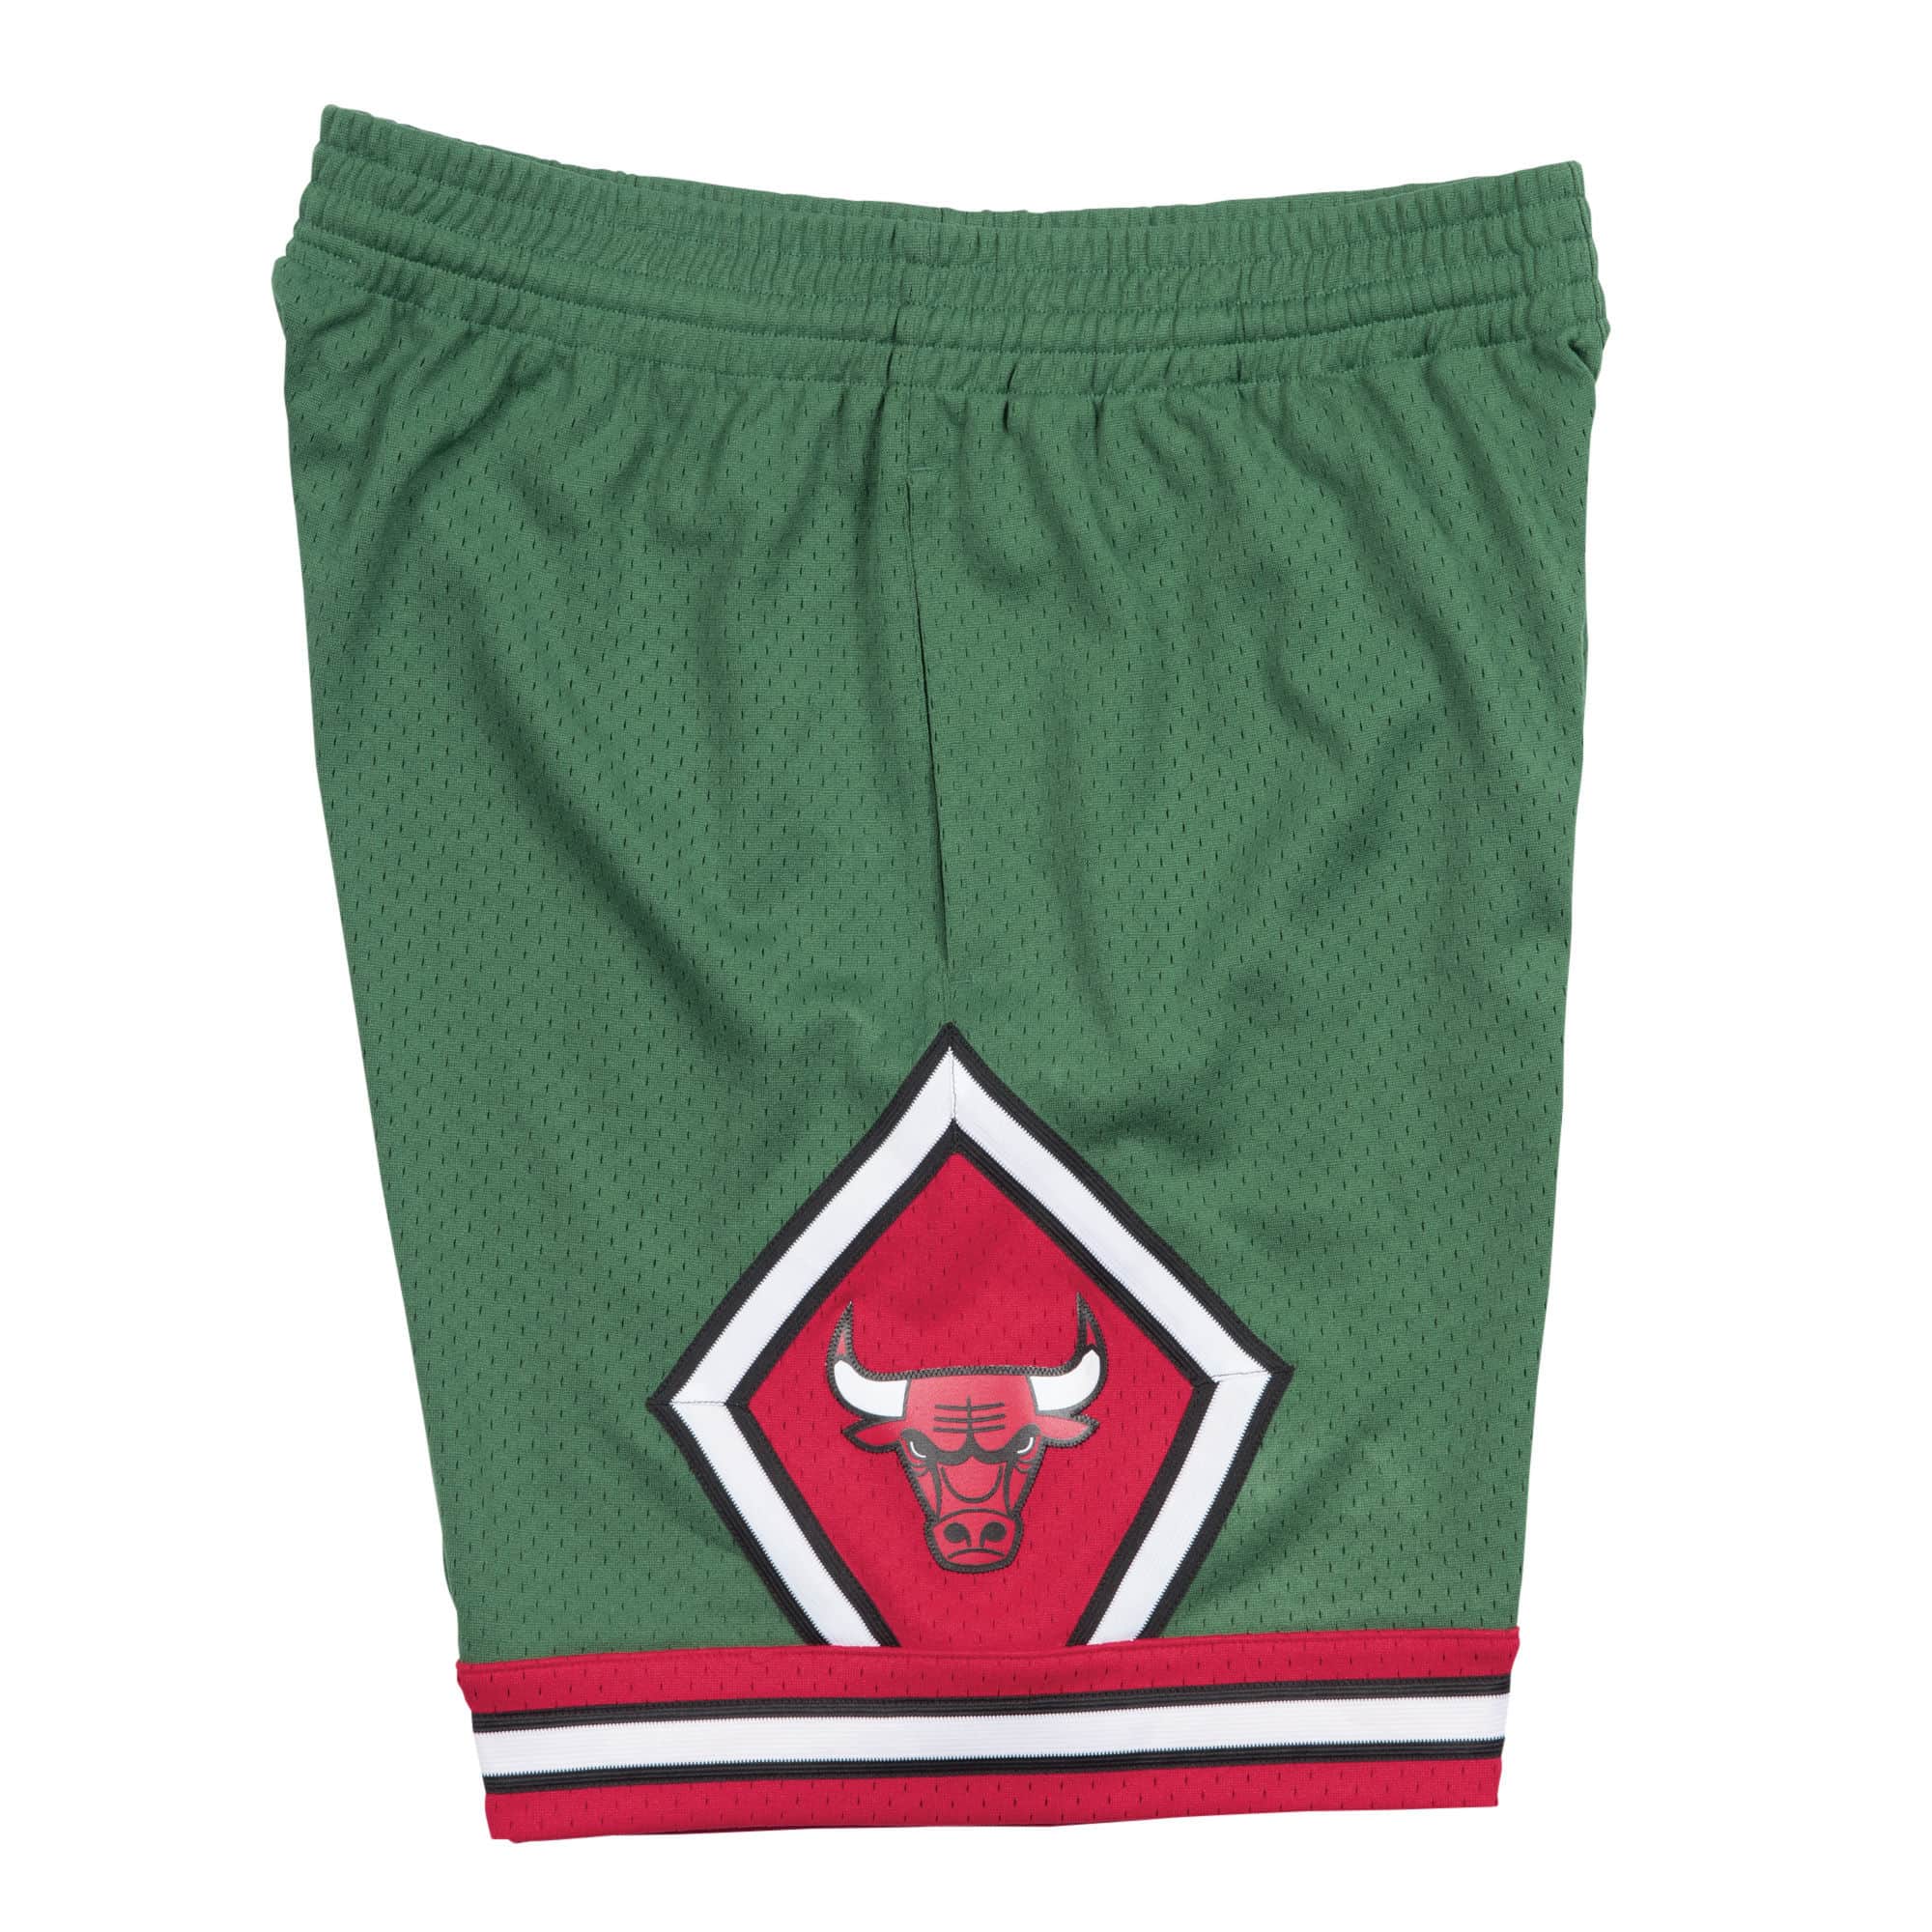 Mitchell & Ness Authentic Shorts Chicago Bulls Green Week 2008-09